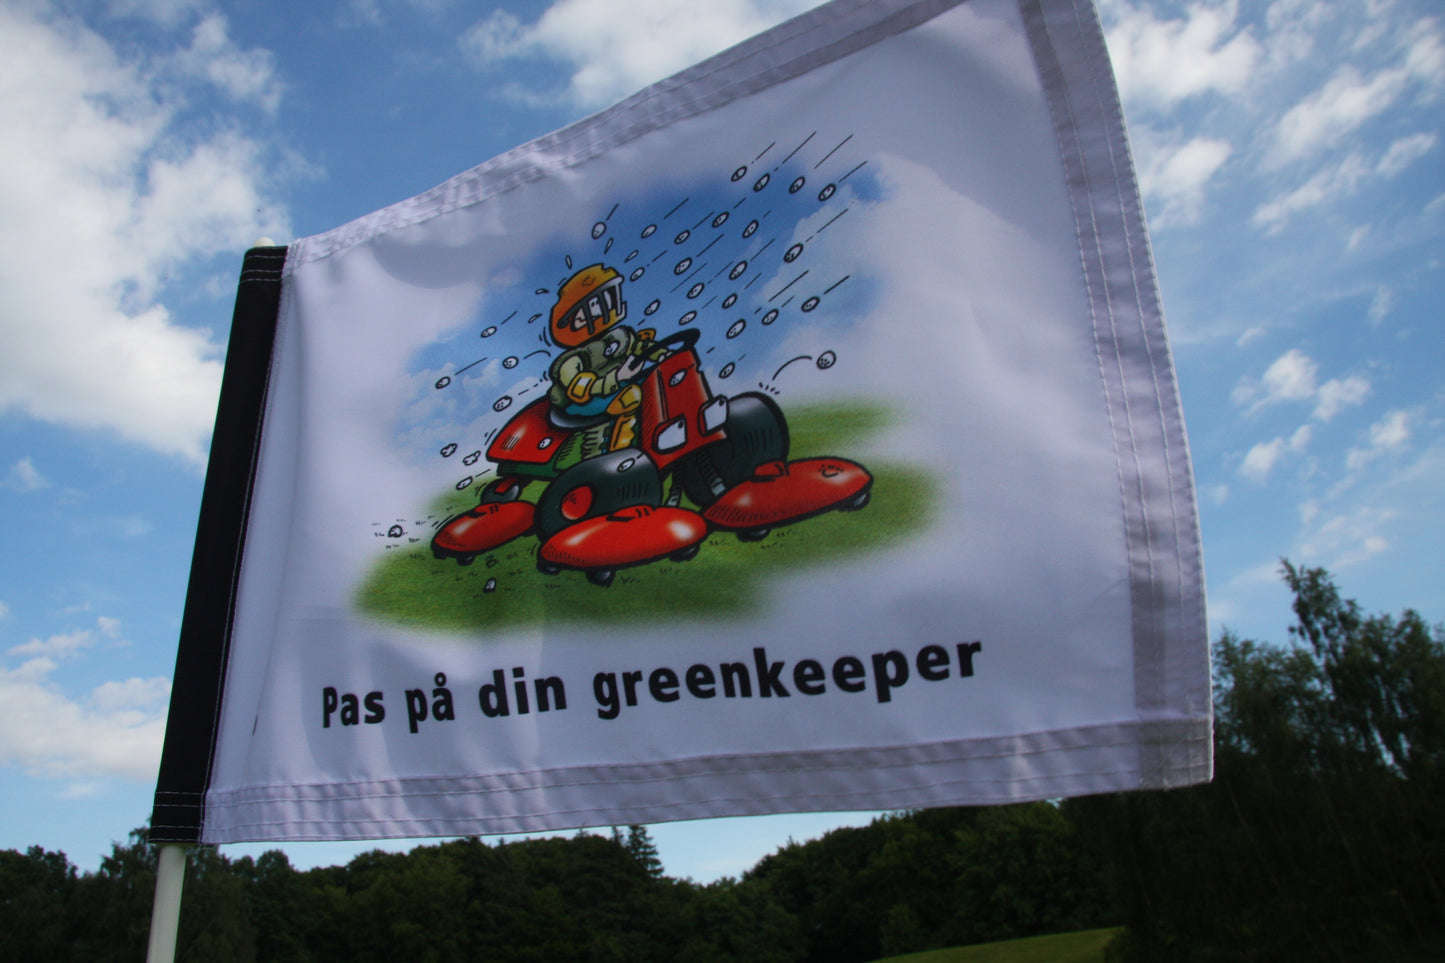 Warning flag “Watch out for the greenkeeper”, 200 gram fabric